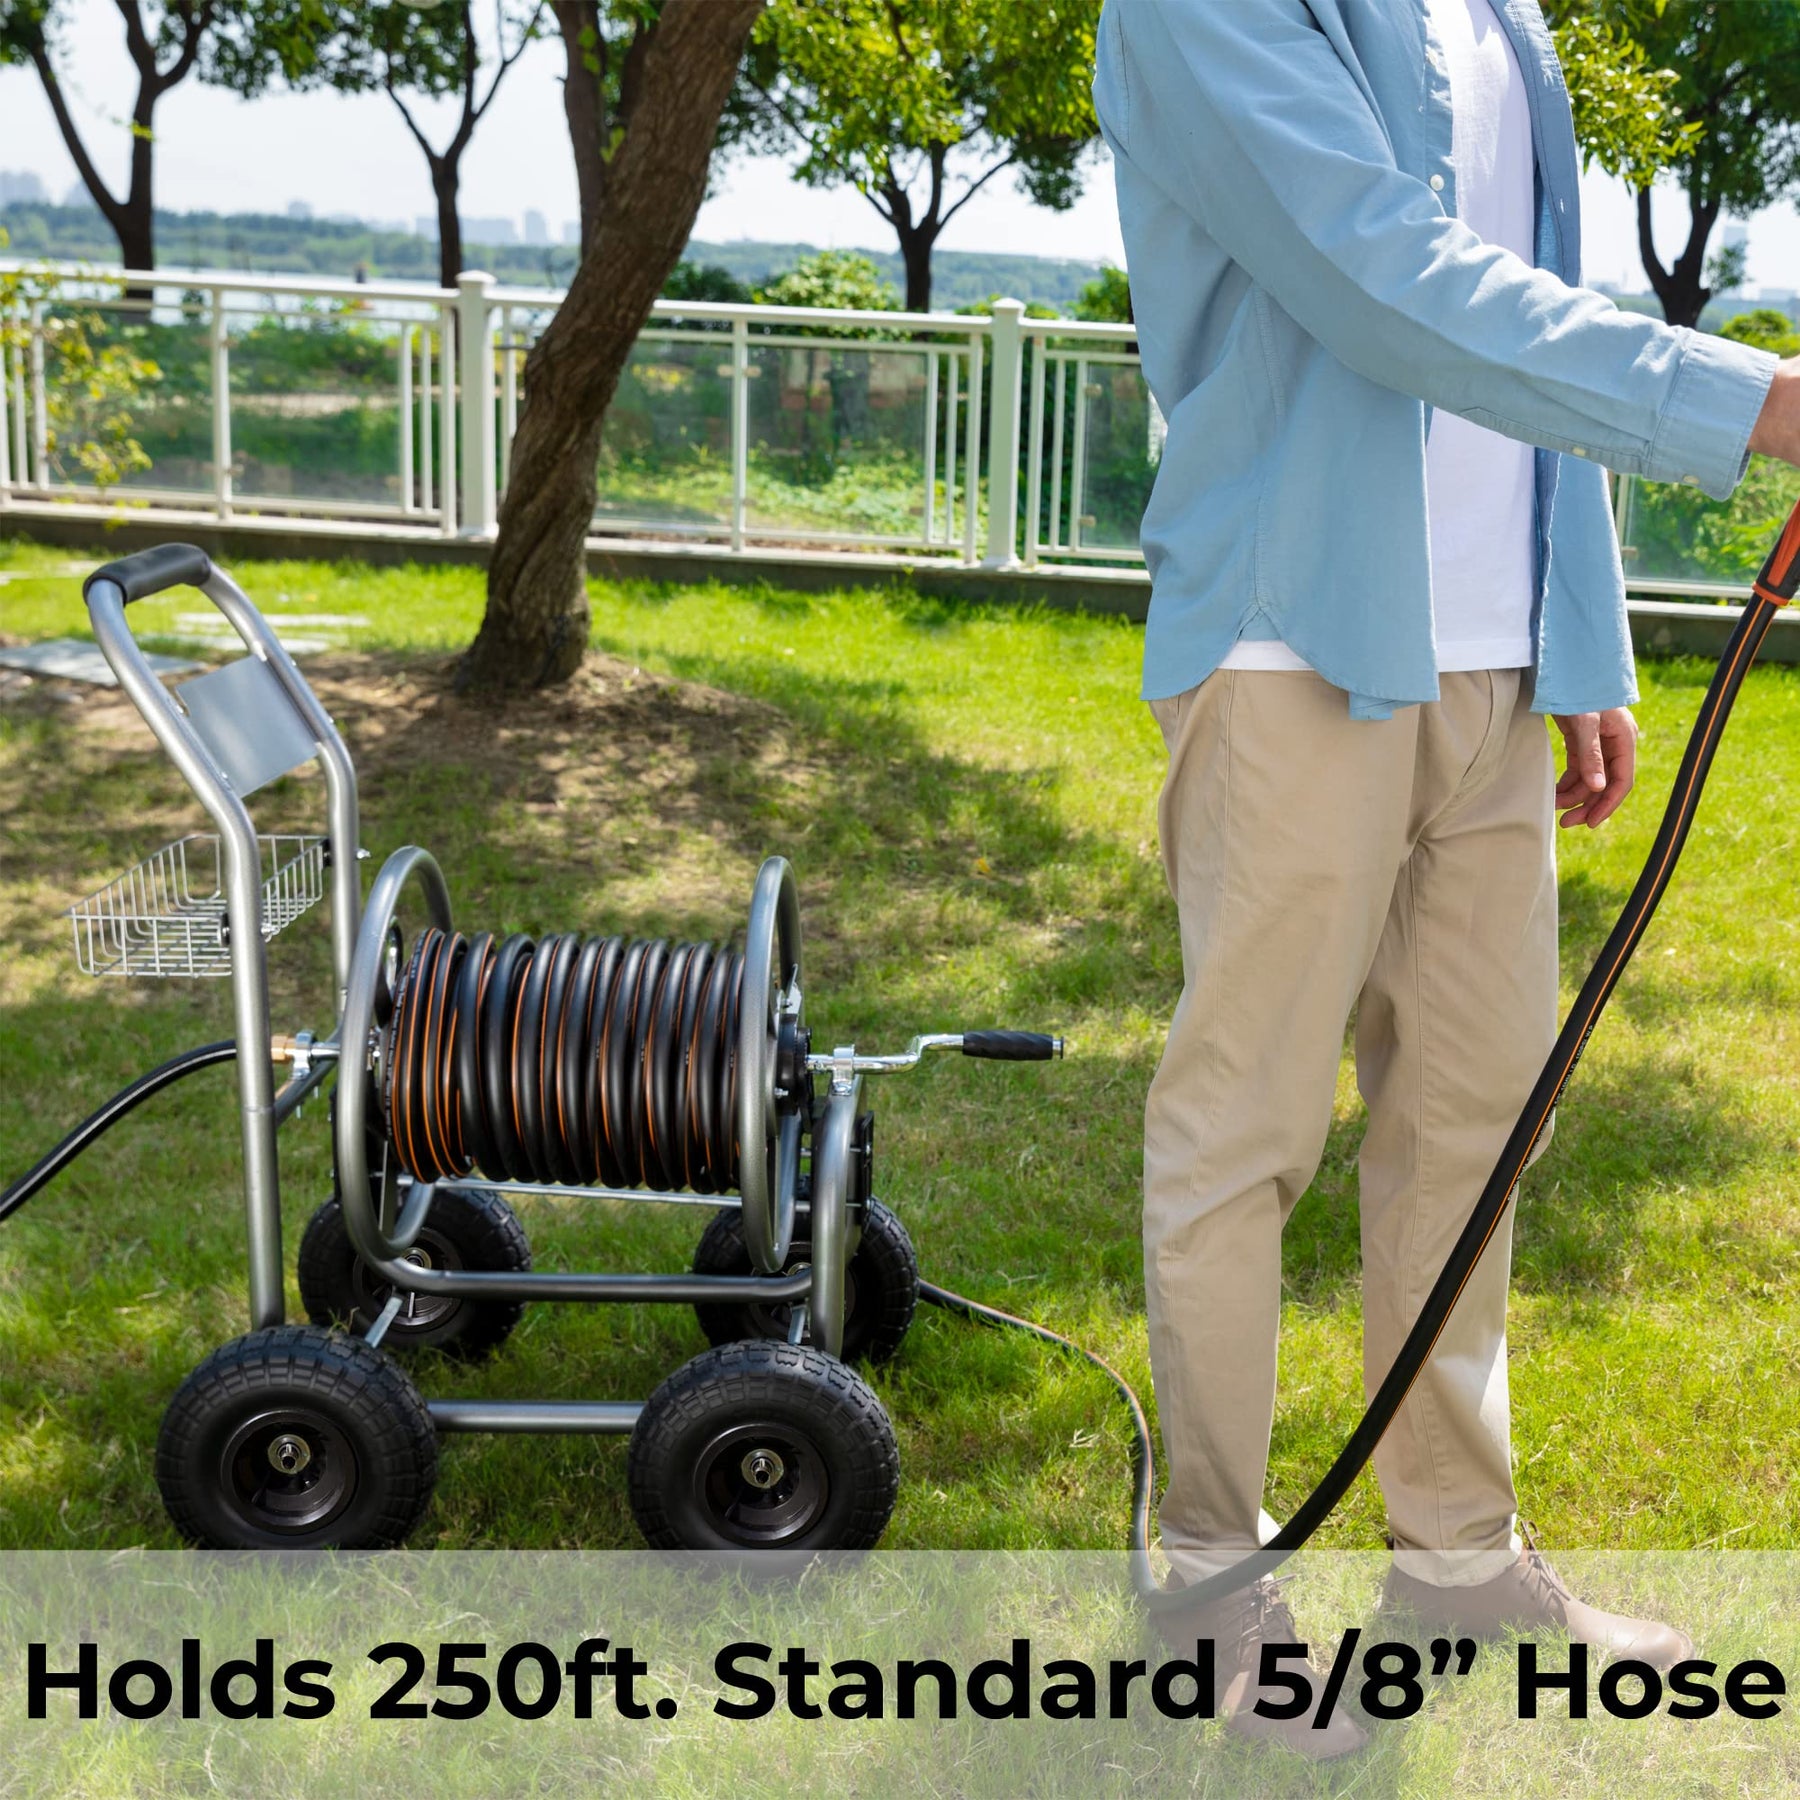 Giraffe Tools Steel Garden Hose Reel Cart with Hose Guide, 250 ft Capacity, Manual Operation, Weather-Resistant, Rust-proof | HC03CUS